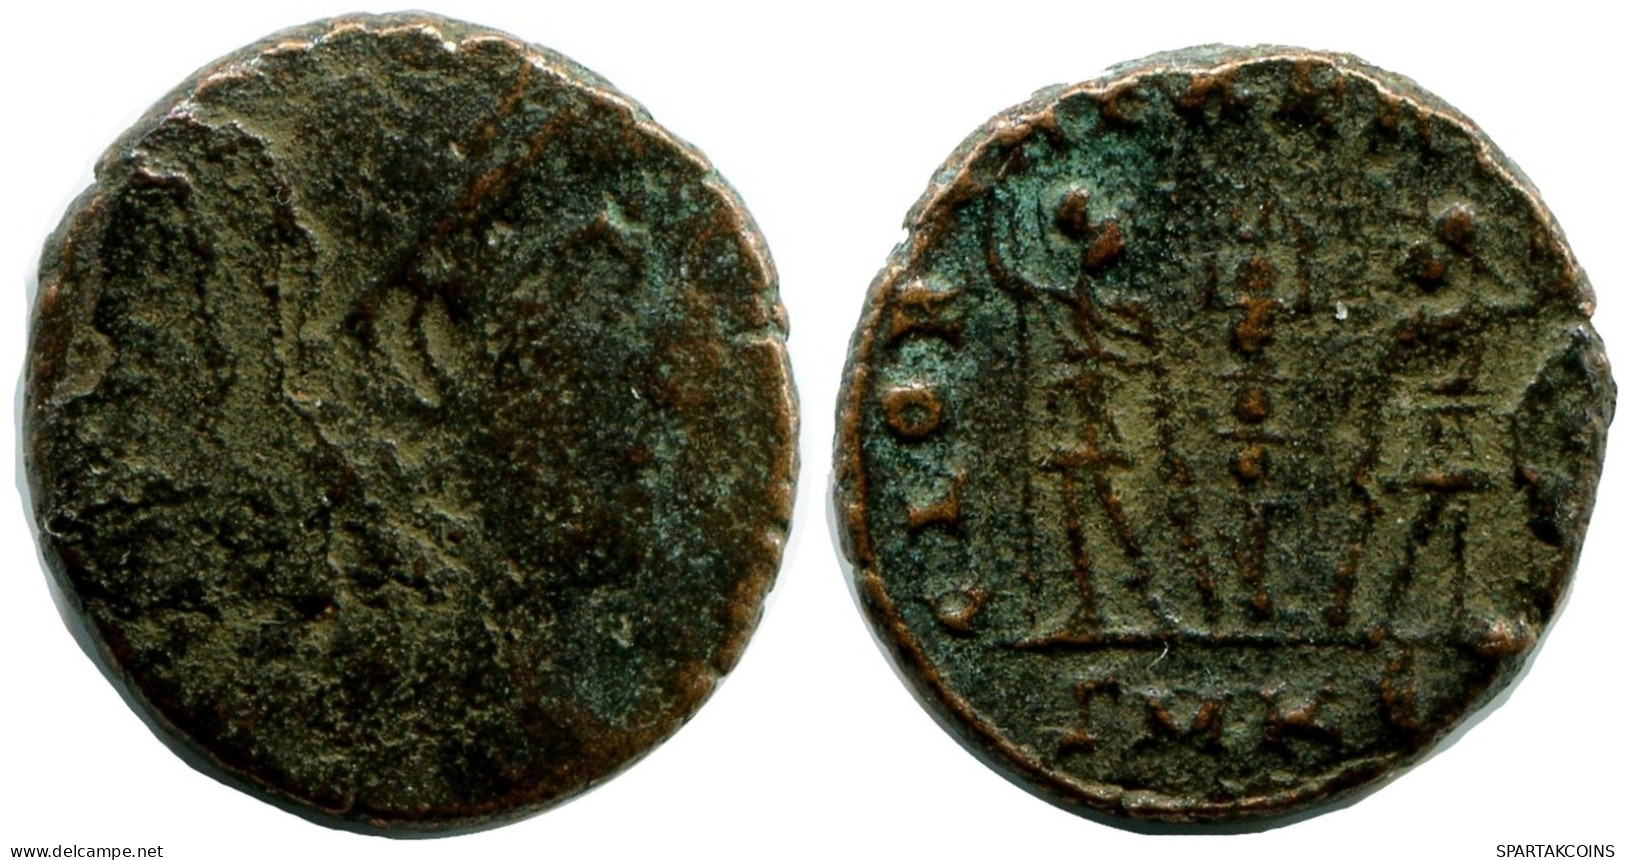 ROMAN Coin MINTED IN CYZICUS FROM THE ROYAL ONTARIO MUSEUM #ANC11050.14.U.A - The Christian Empire (307 AD To 363 AD)